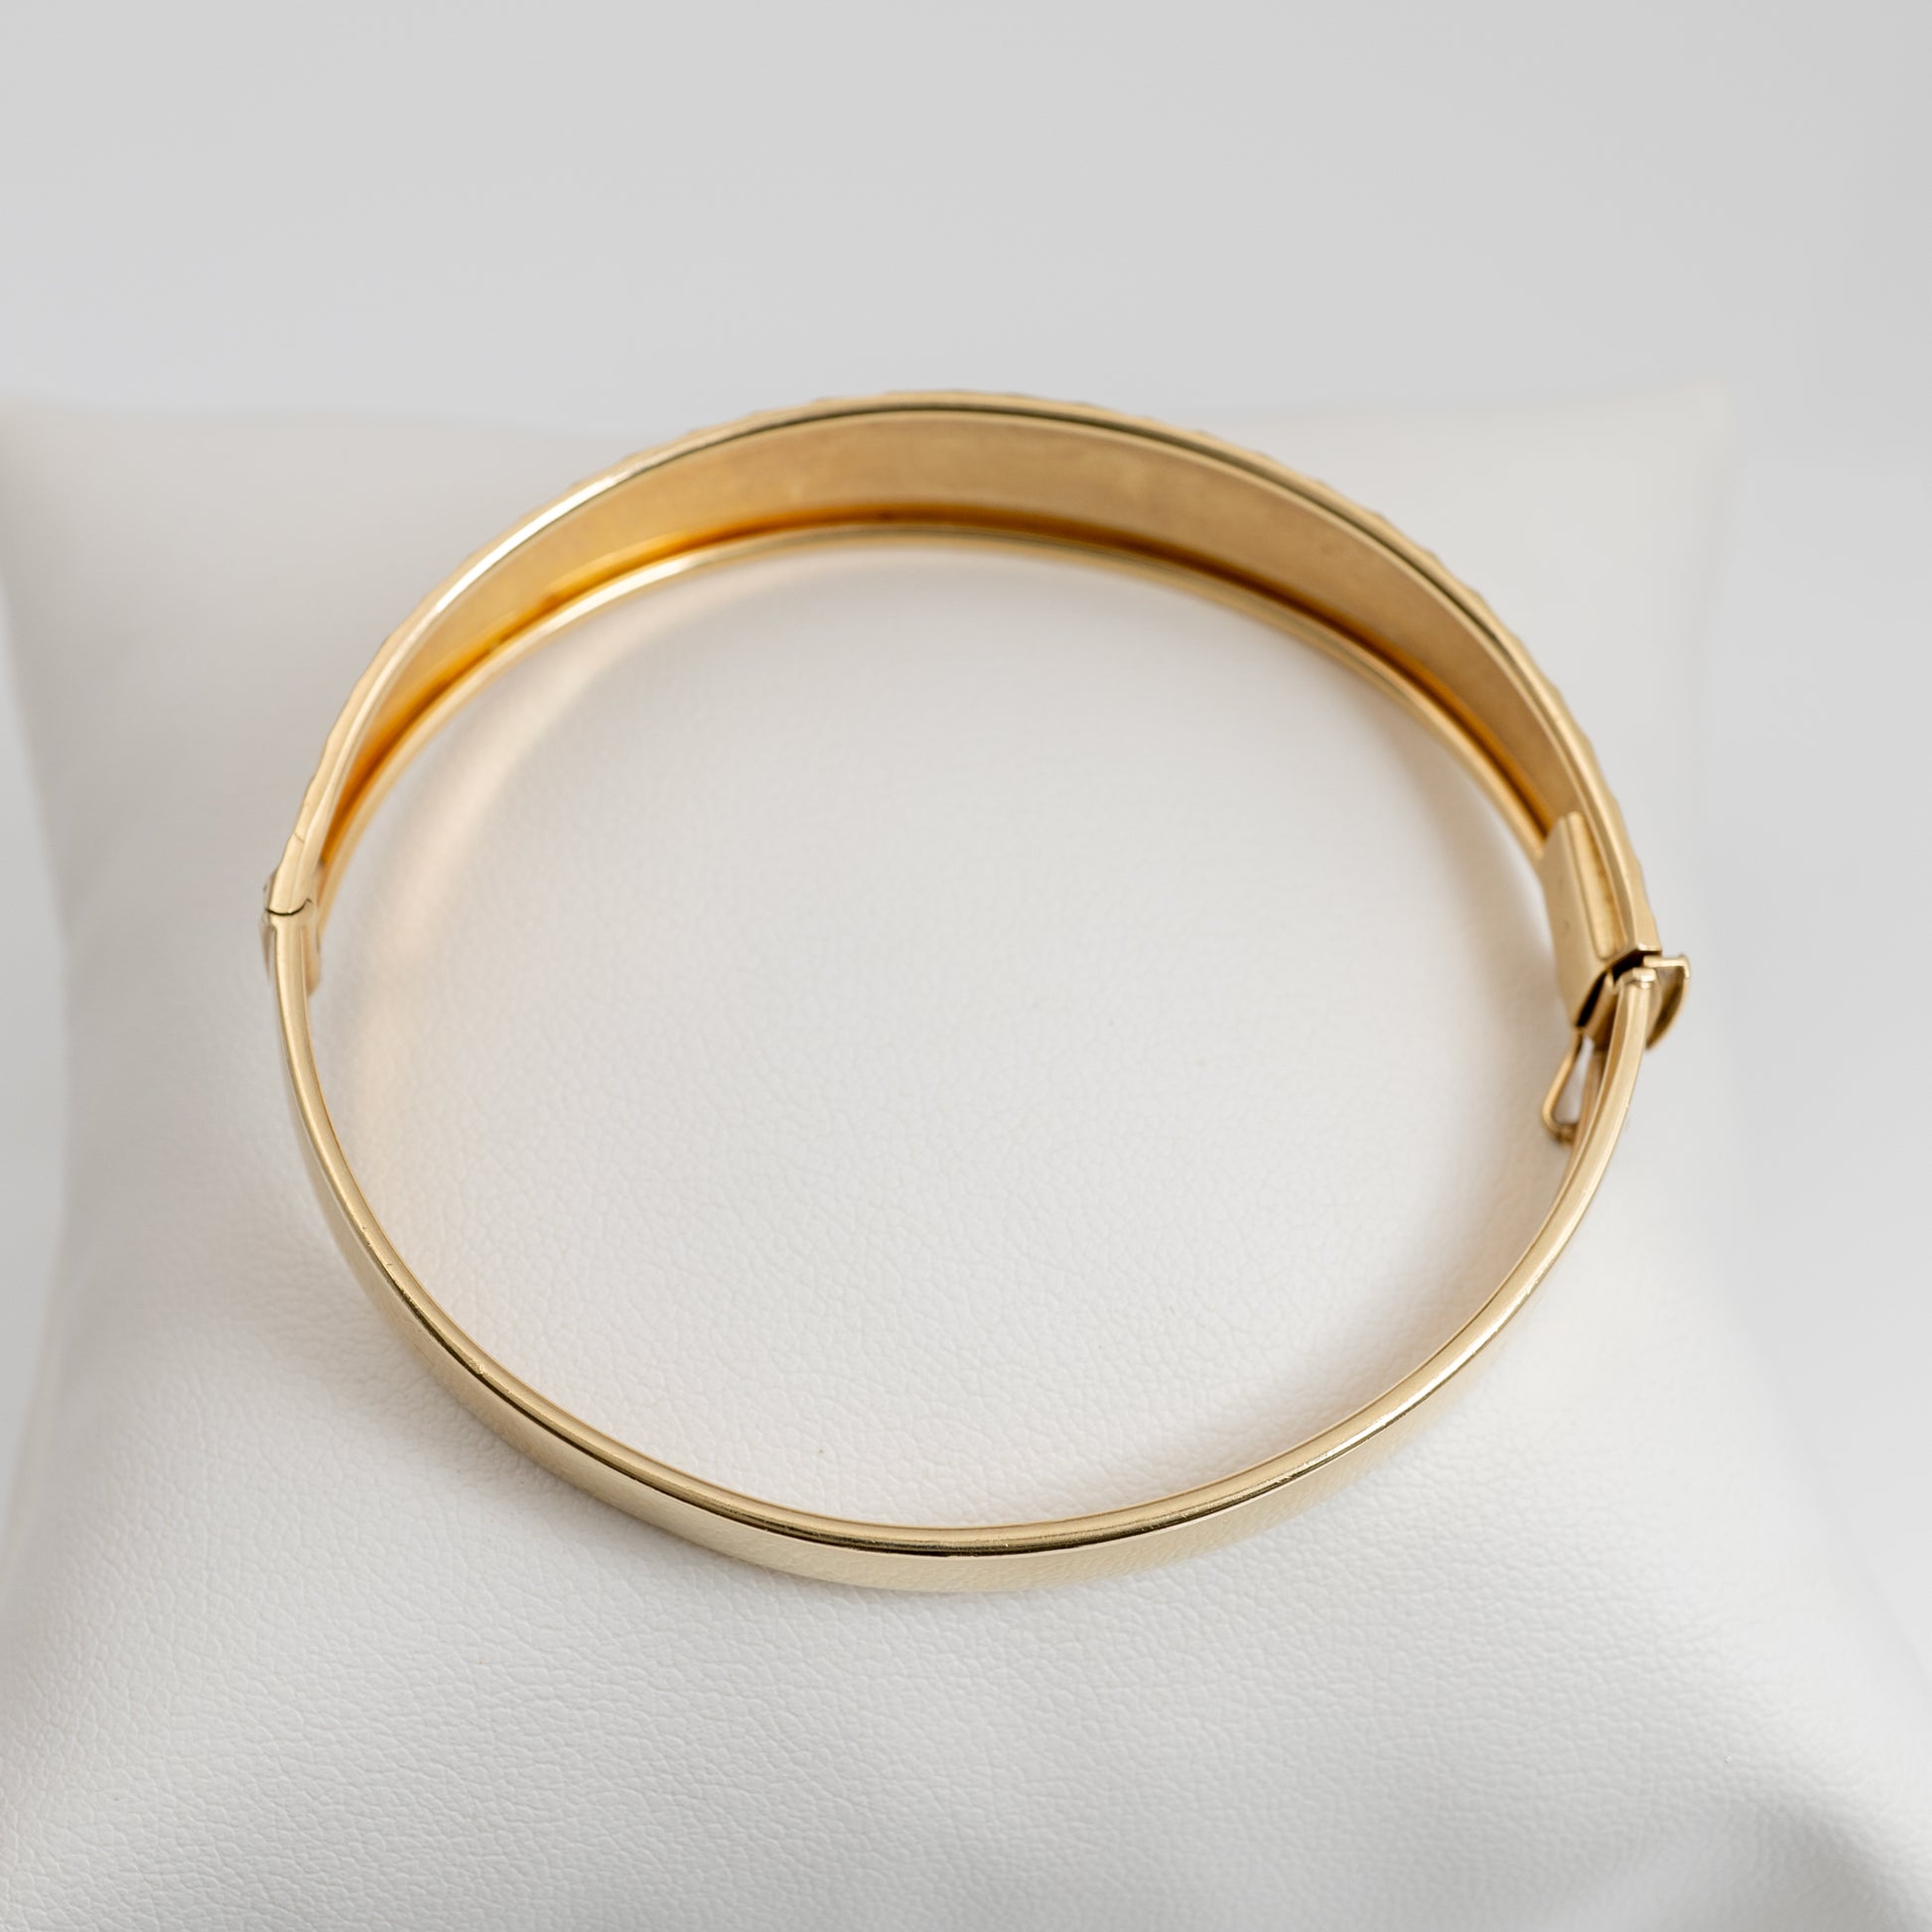 women gold bangle with slide lock clasp